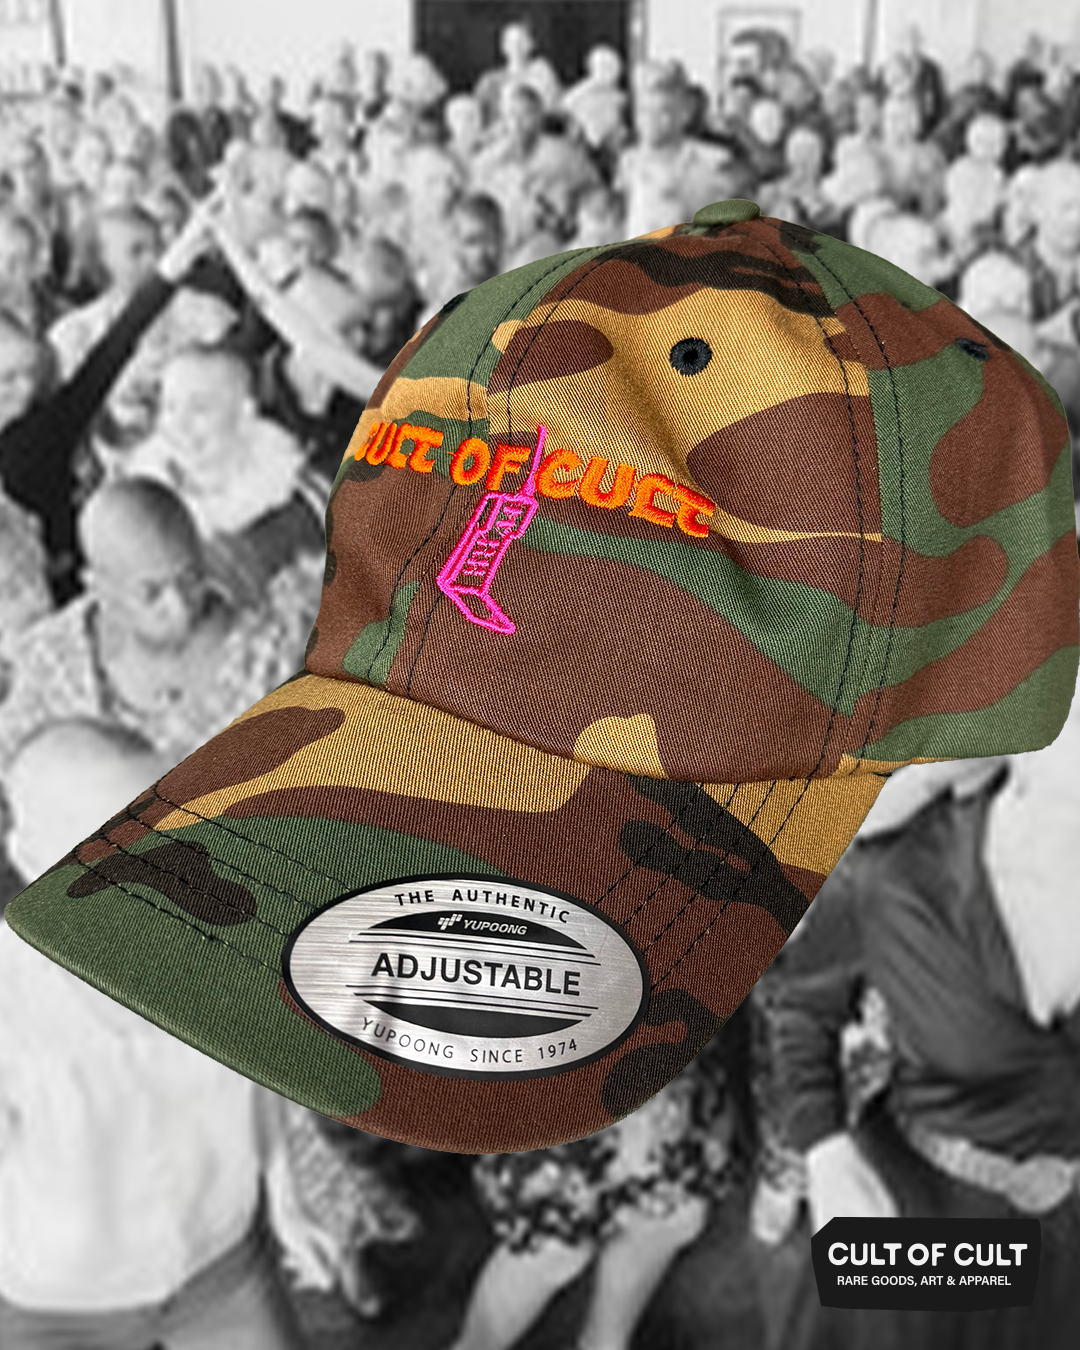 the side view of the camo Cult of Cult hat